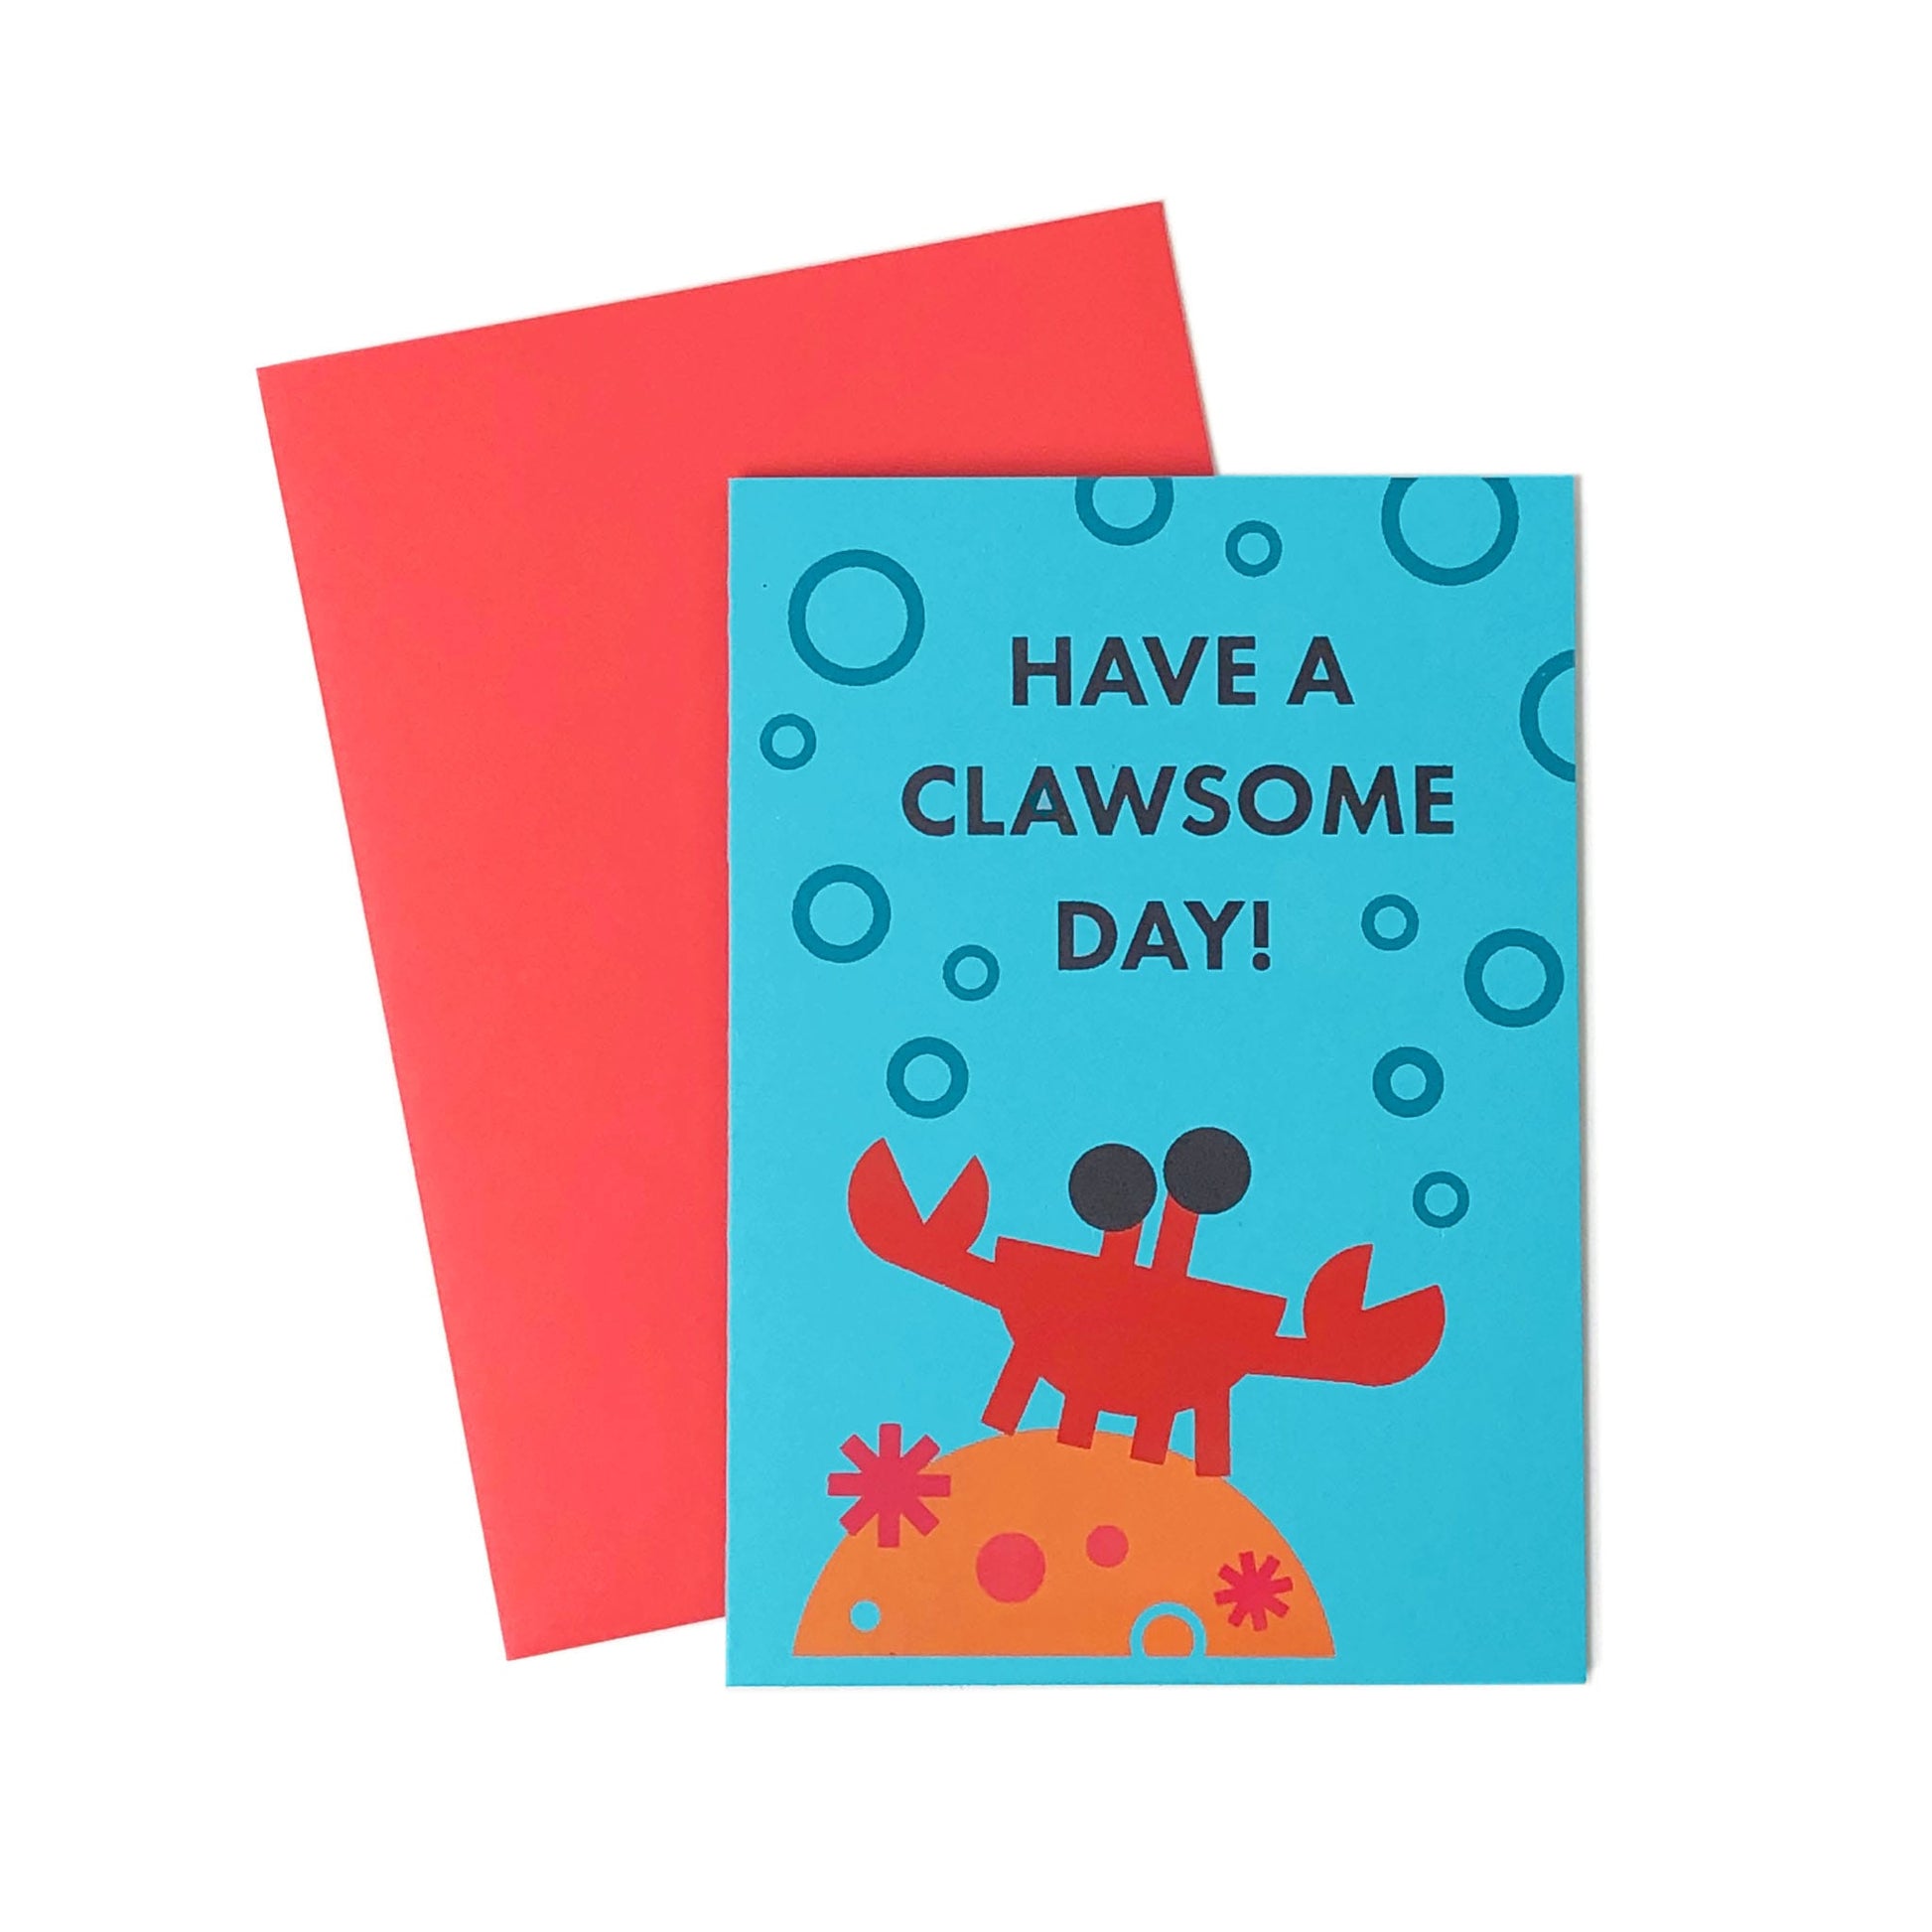 A blue greeting card with an illustration of a crab on coral and bubbles.  On the card is a text that says "Have a clawsome day!". Behind the card is a red-pink envelope.